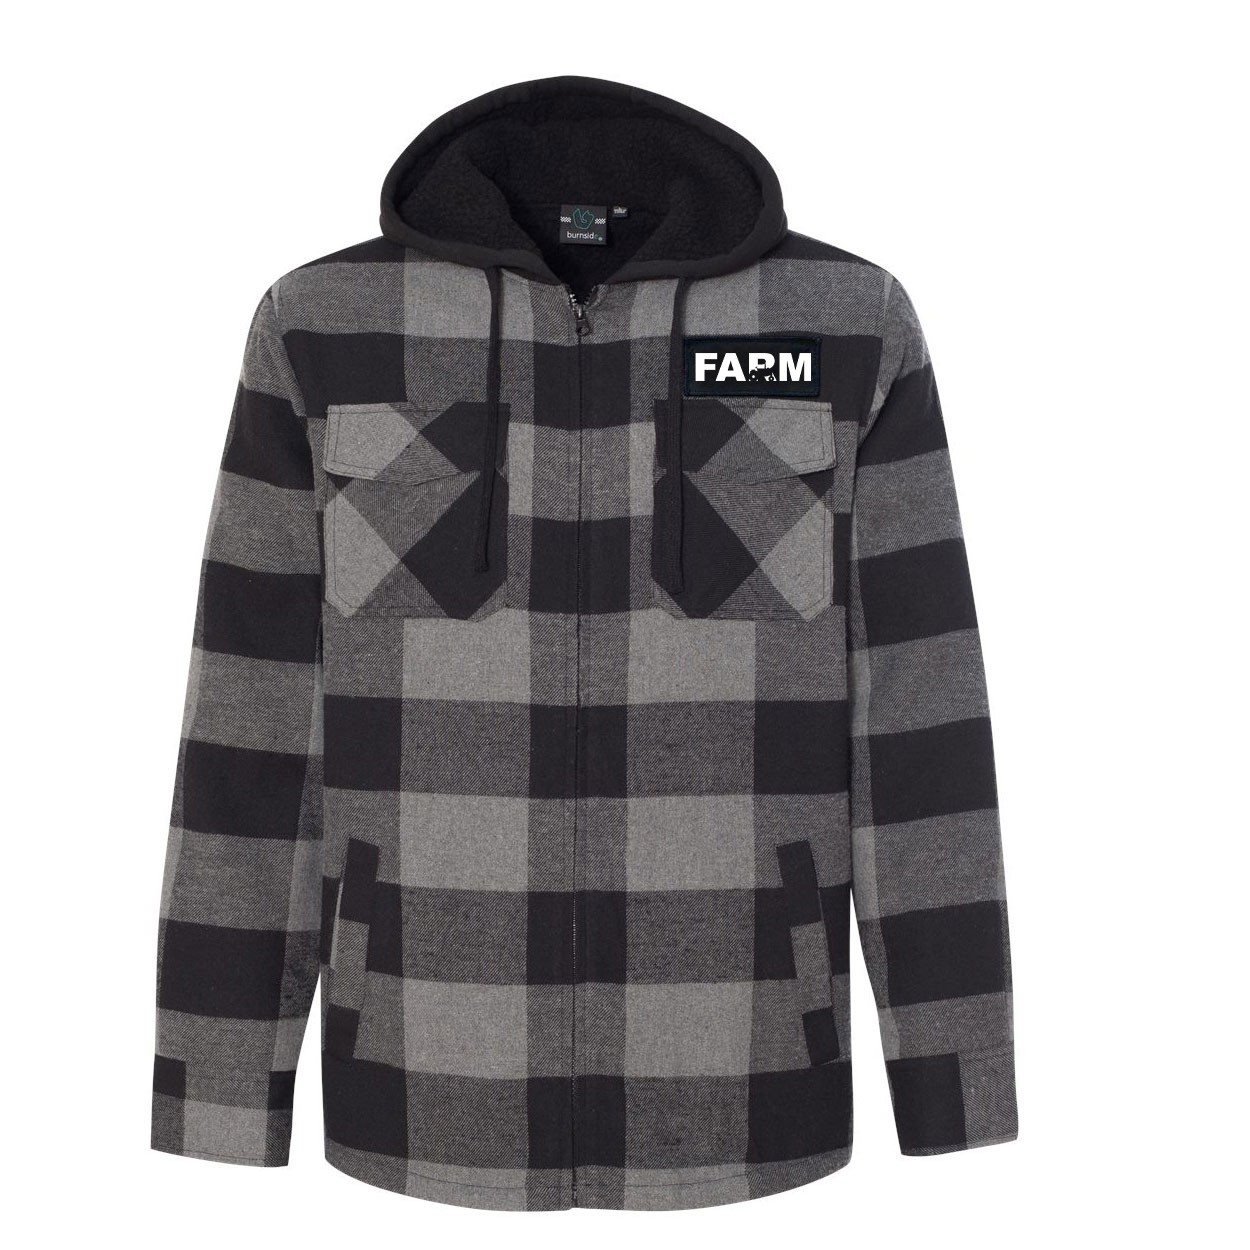 Farm Tractor Logo Classic Unisex Full Zip Woven Patch Hooded Flannel Jacket Black/Gray (White Logo)